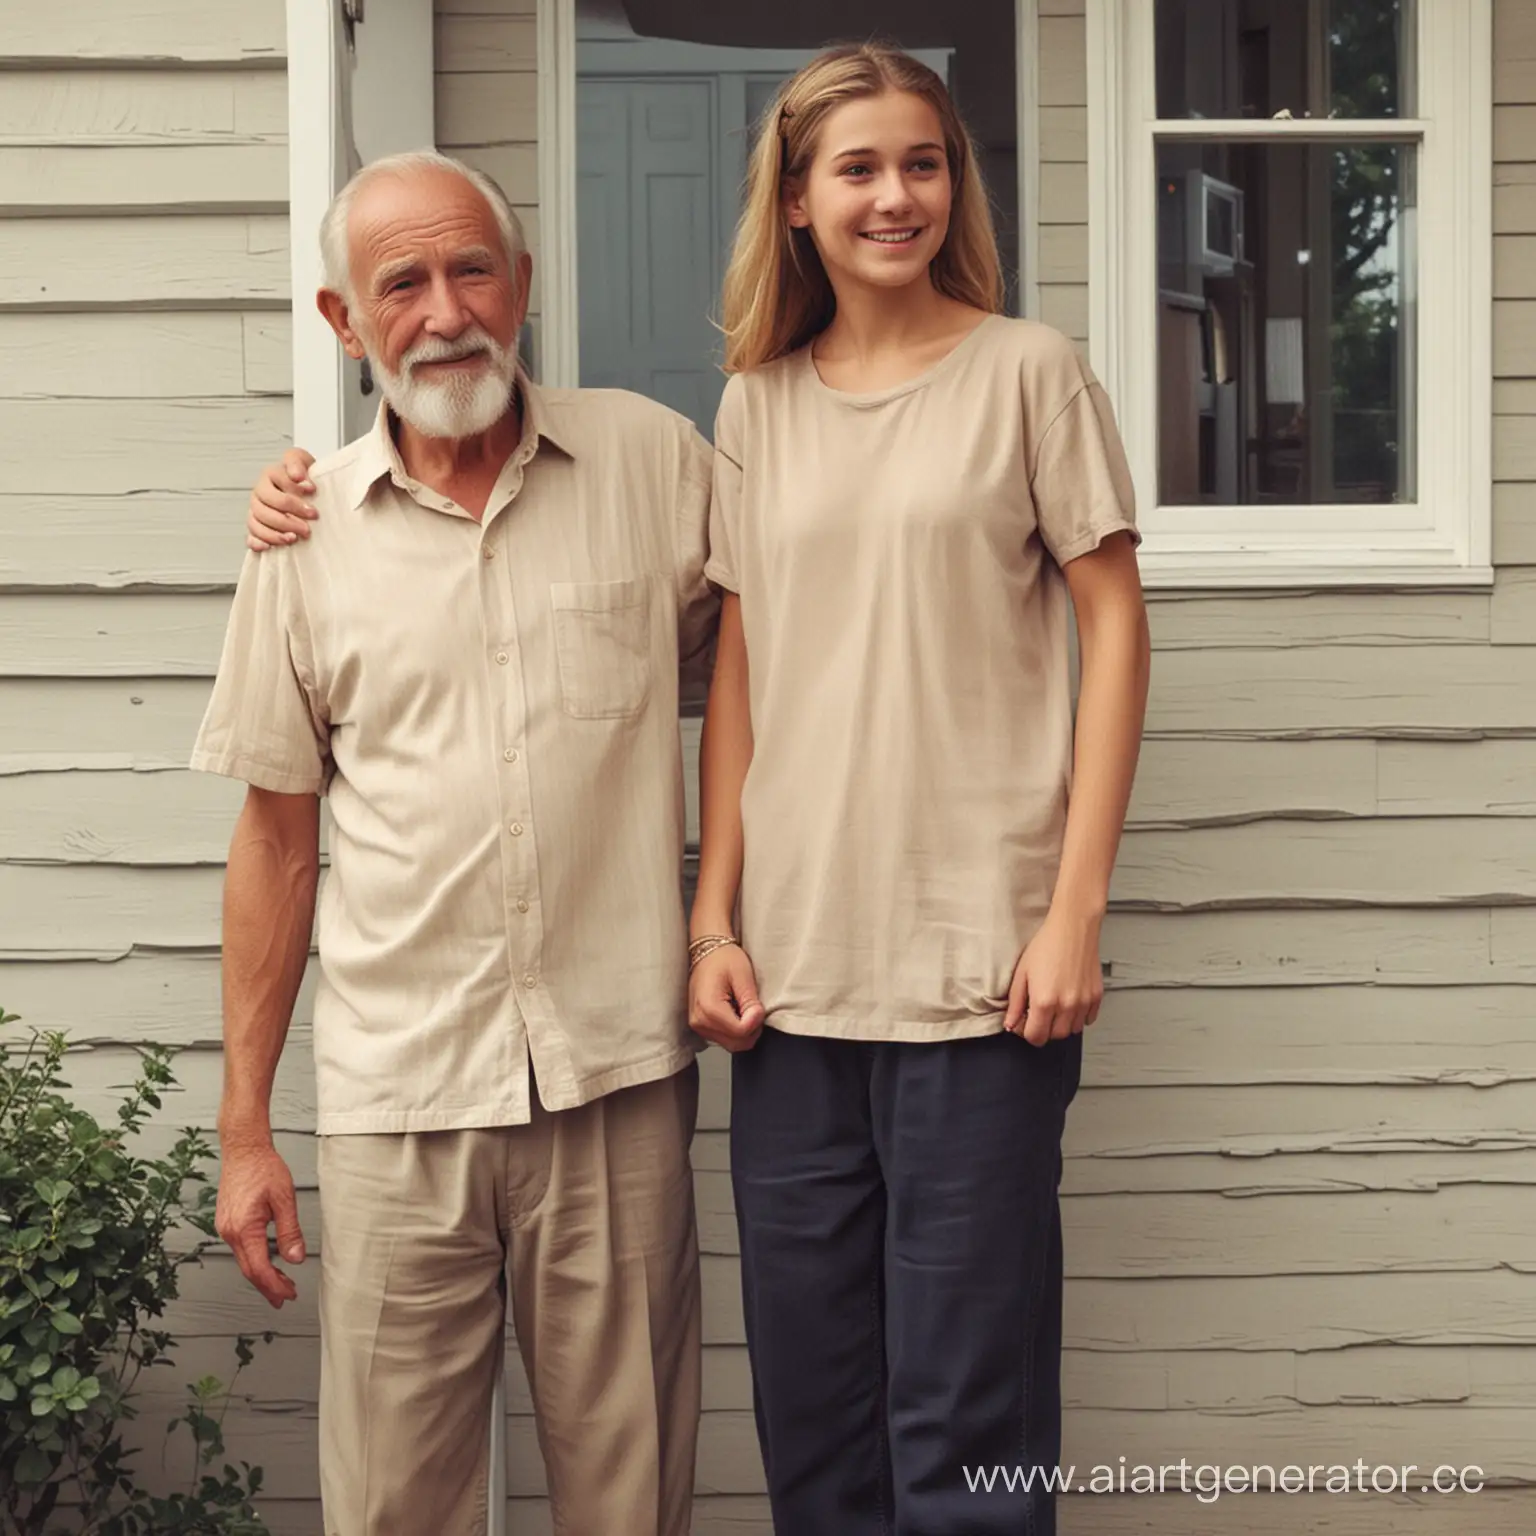 Cute-White-Girl-Embraced-by-20ft-Tall-Giant-Old-Man